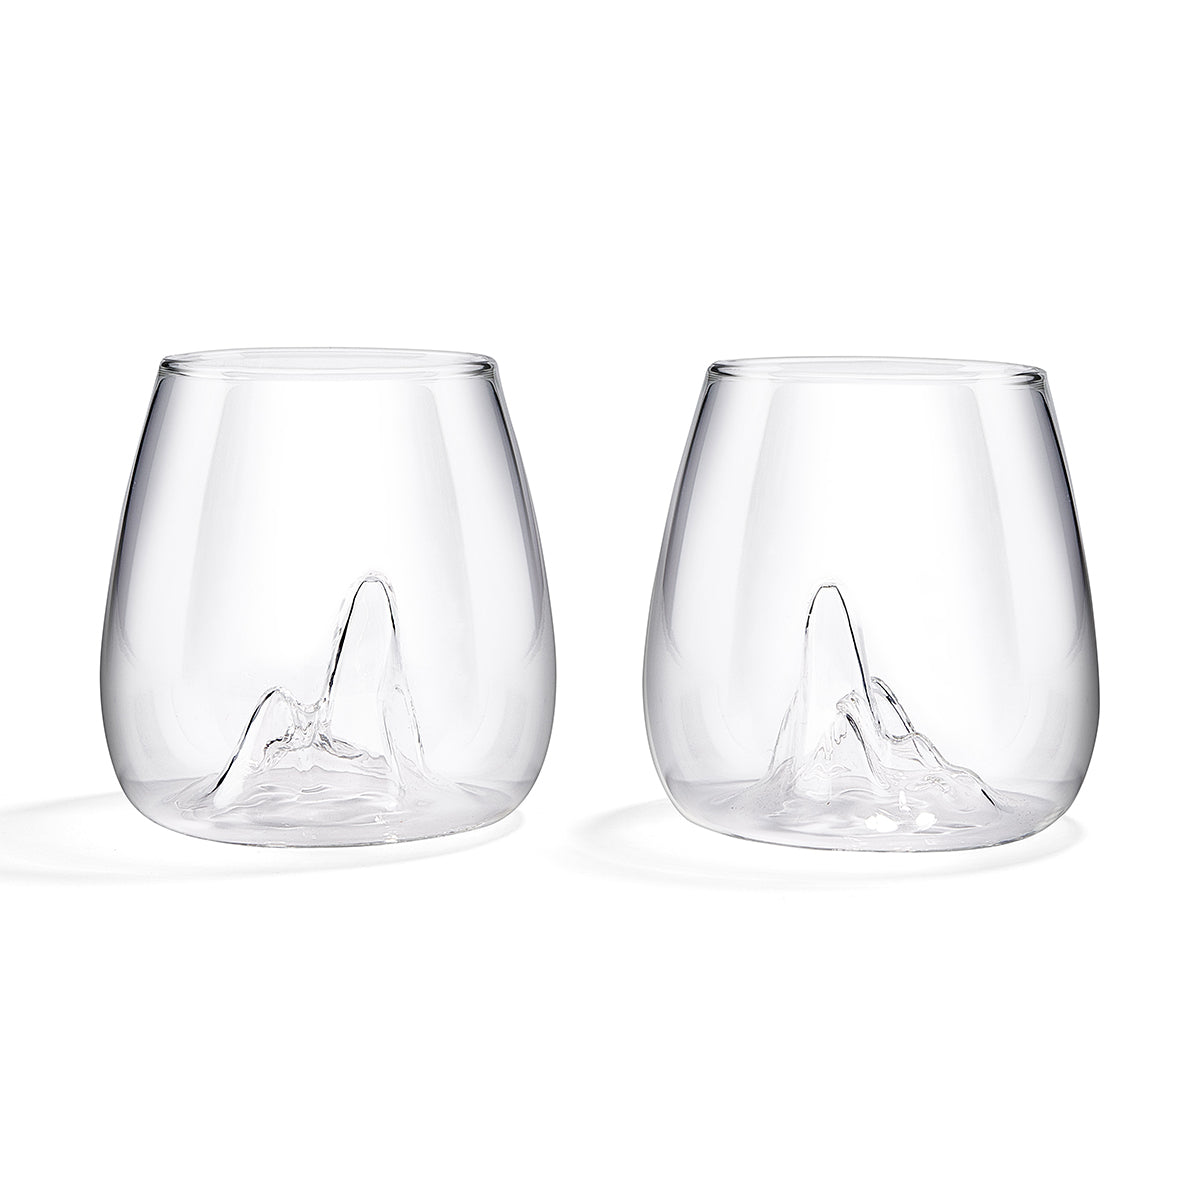 Image of a glass carafe with the shape of a mountain peak indented into its base. Set against a white background.